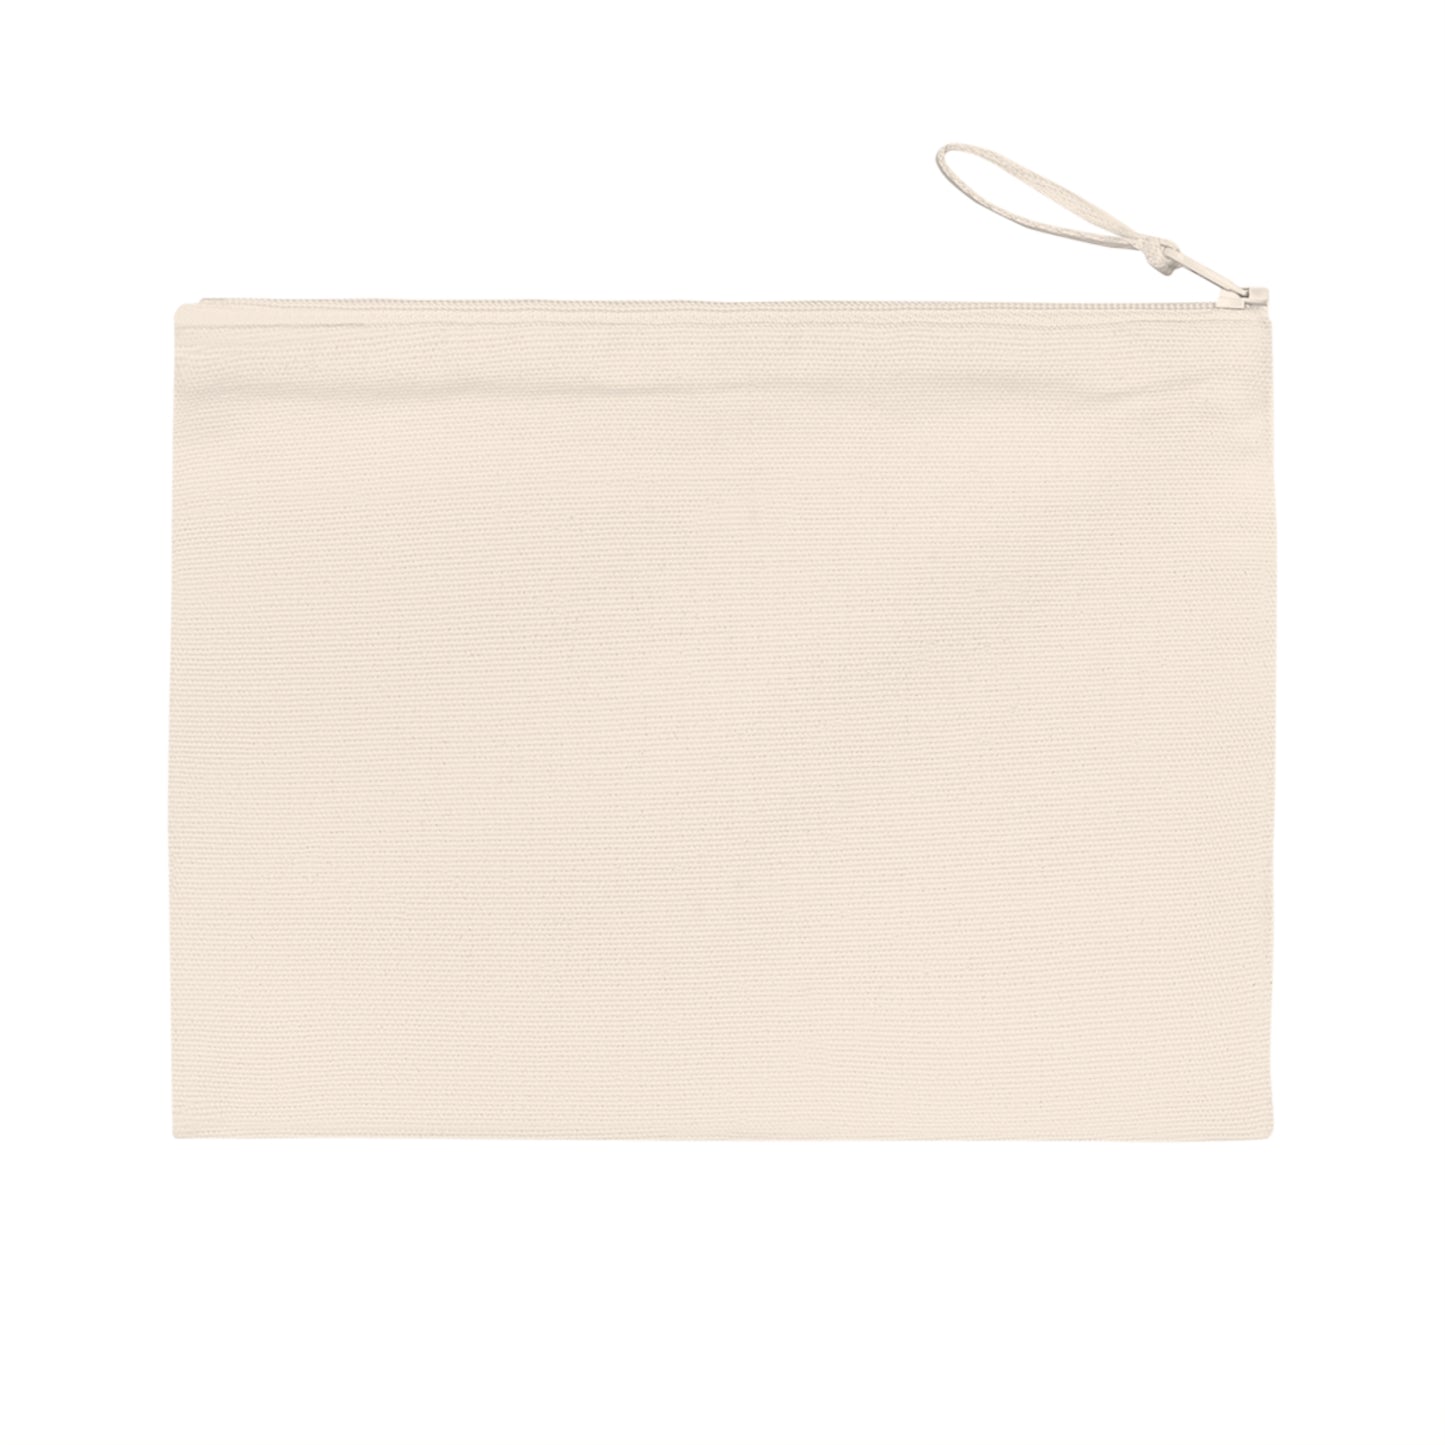 Spring Bauhaus Pencil Case little bag Recycled cotton and polyester